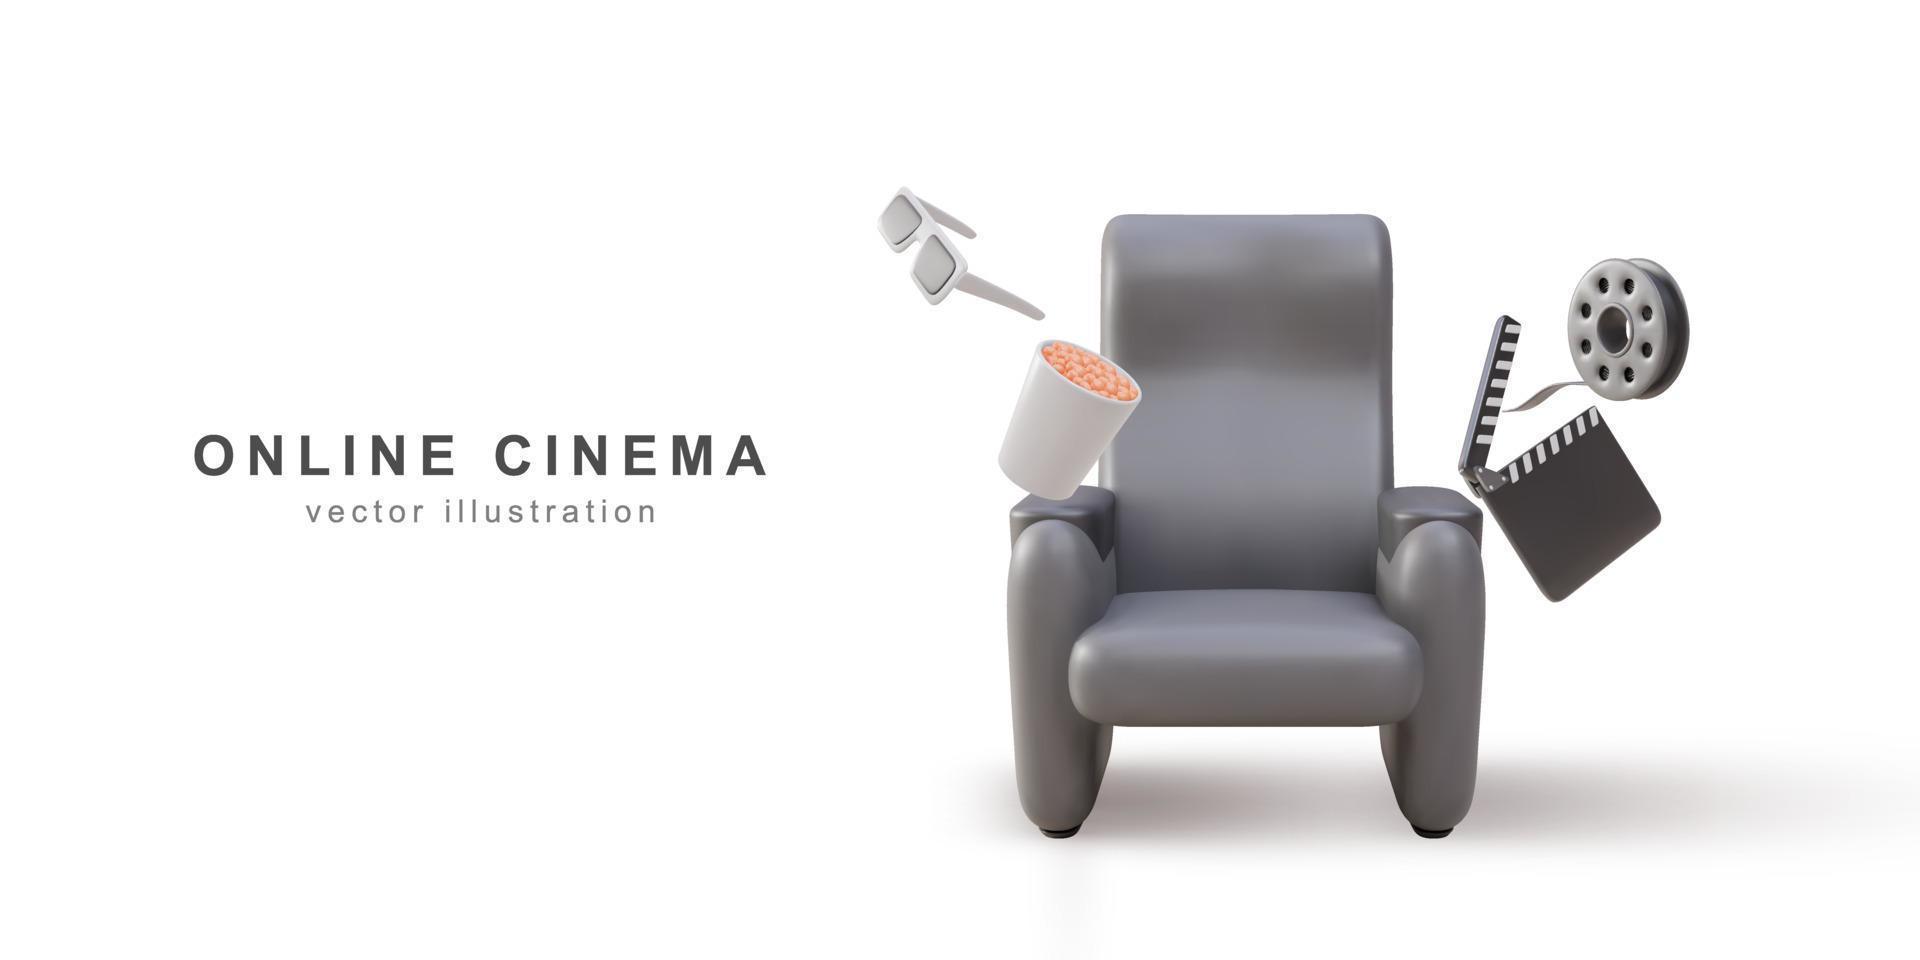 3d Realistic Cinema Armchair With Comfortable Elbows Near Popcorn Bowl, Tickets, Film Reel And Movie Clapper. Vector illustration.